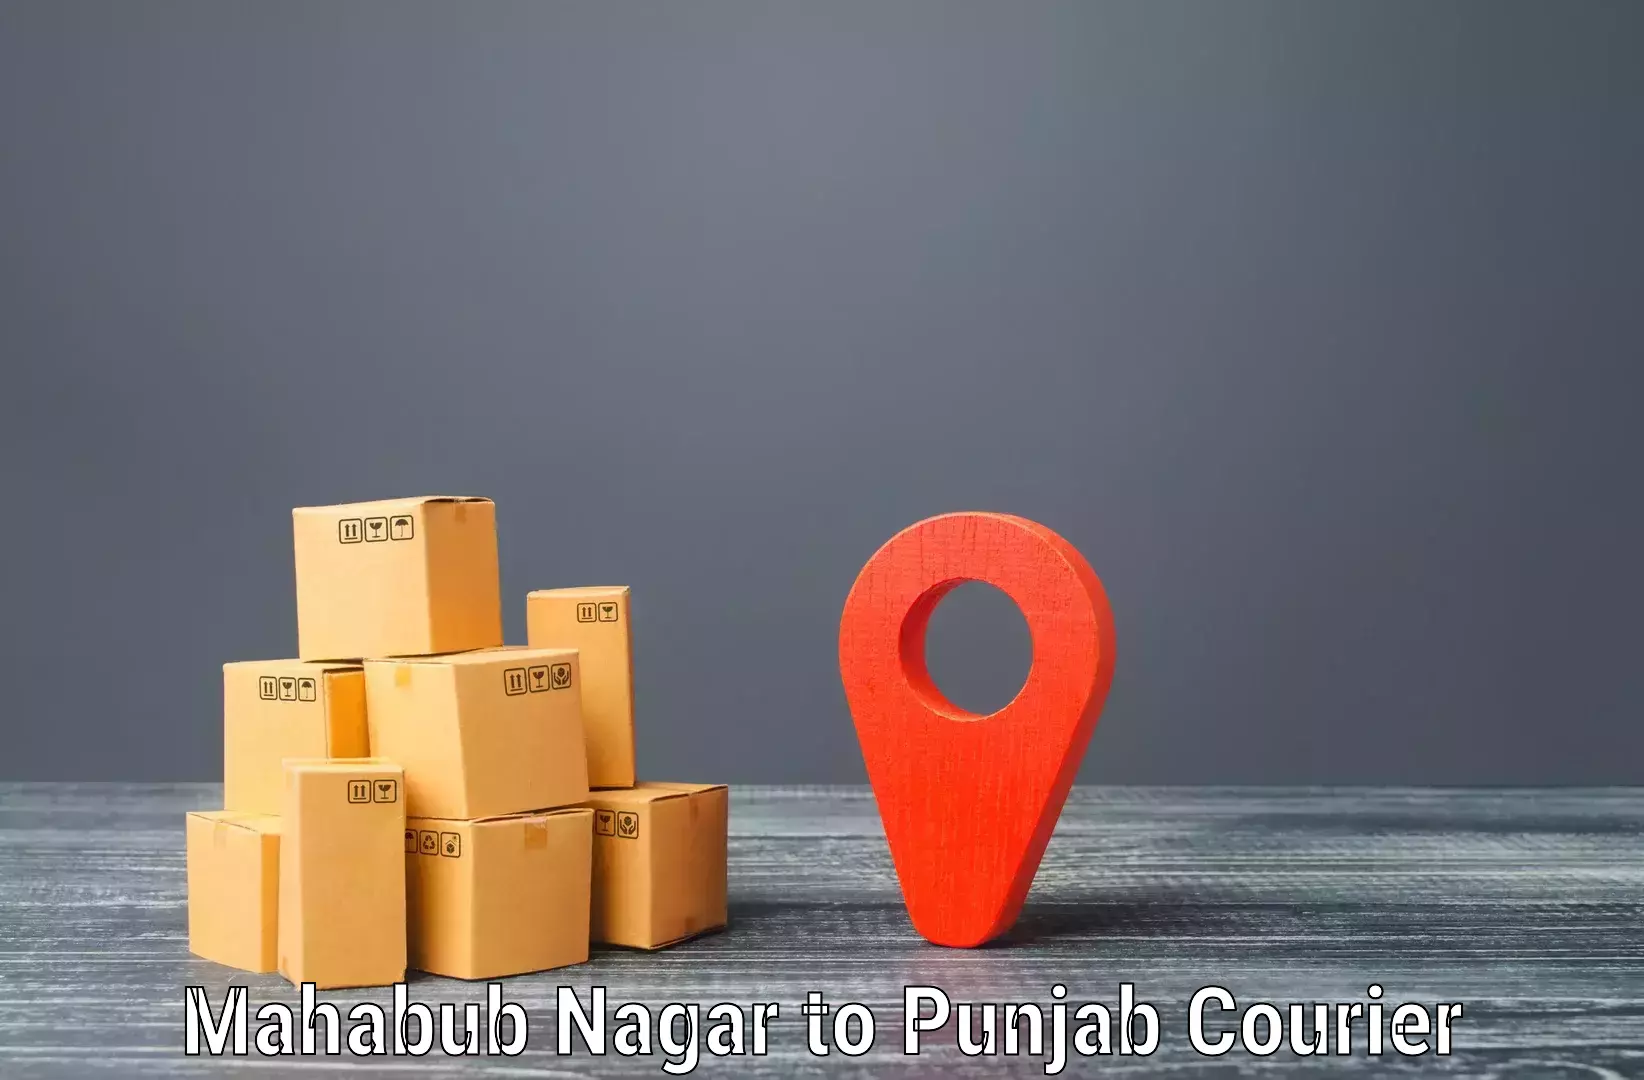 Sustainable courier practices Mahabub Nagar to Mehta Chowk